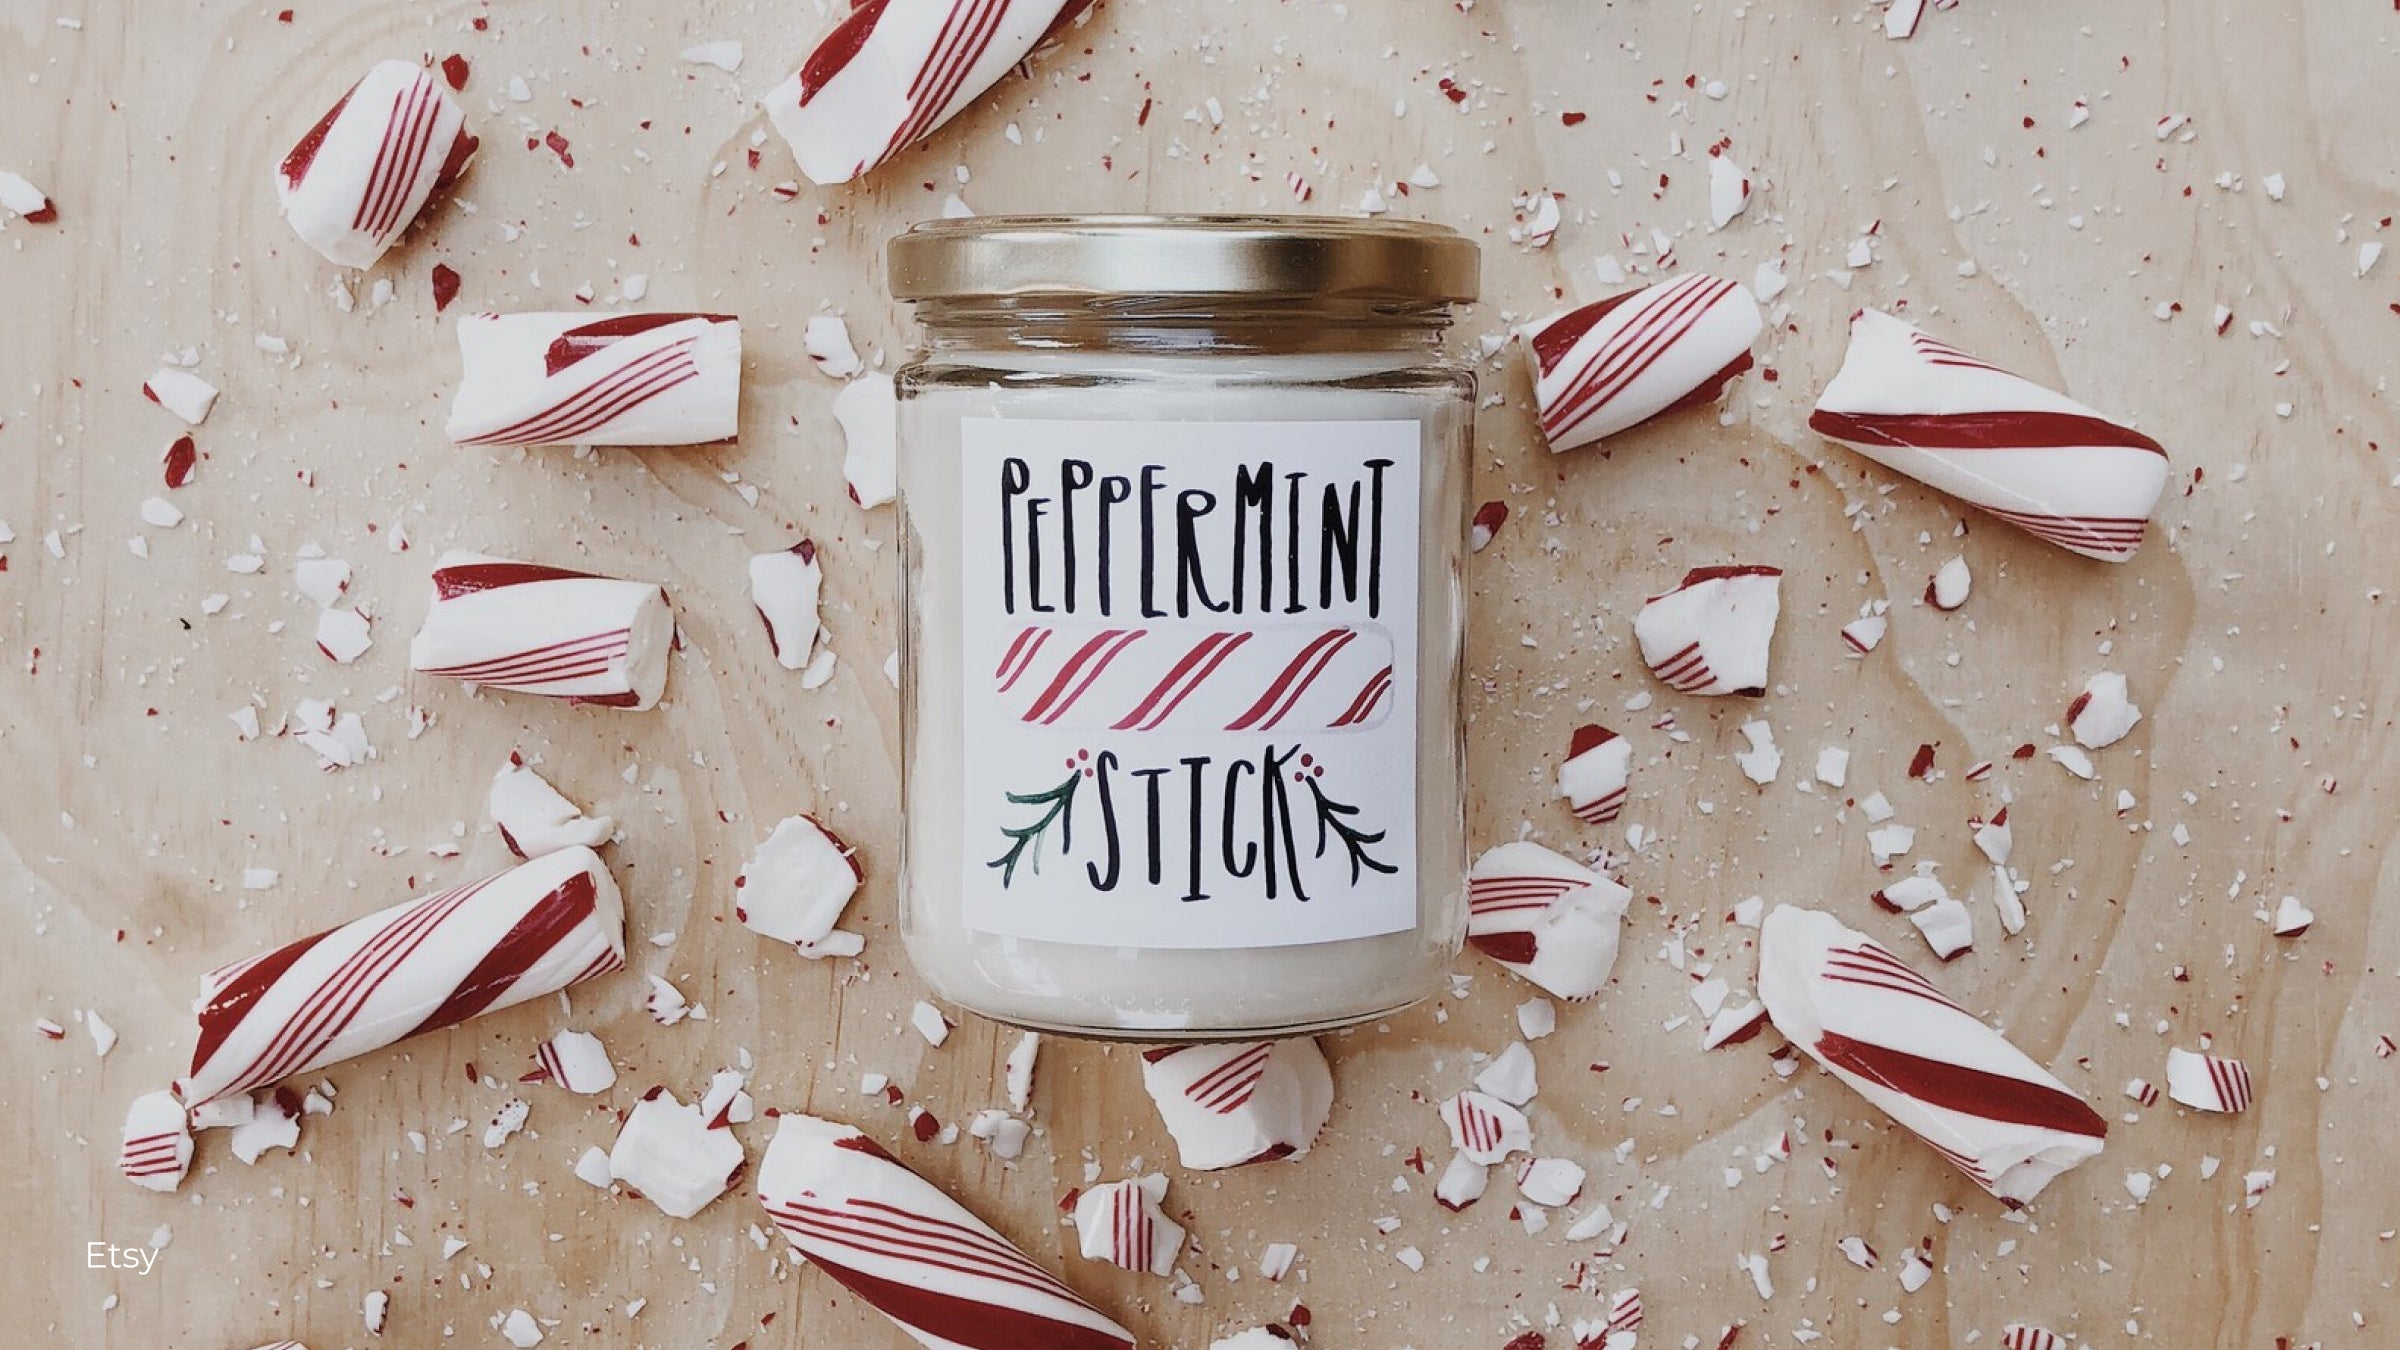 Peppermint candle from Etsy with pieces of peppermint candy broken surrounding the jar